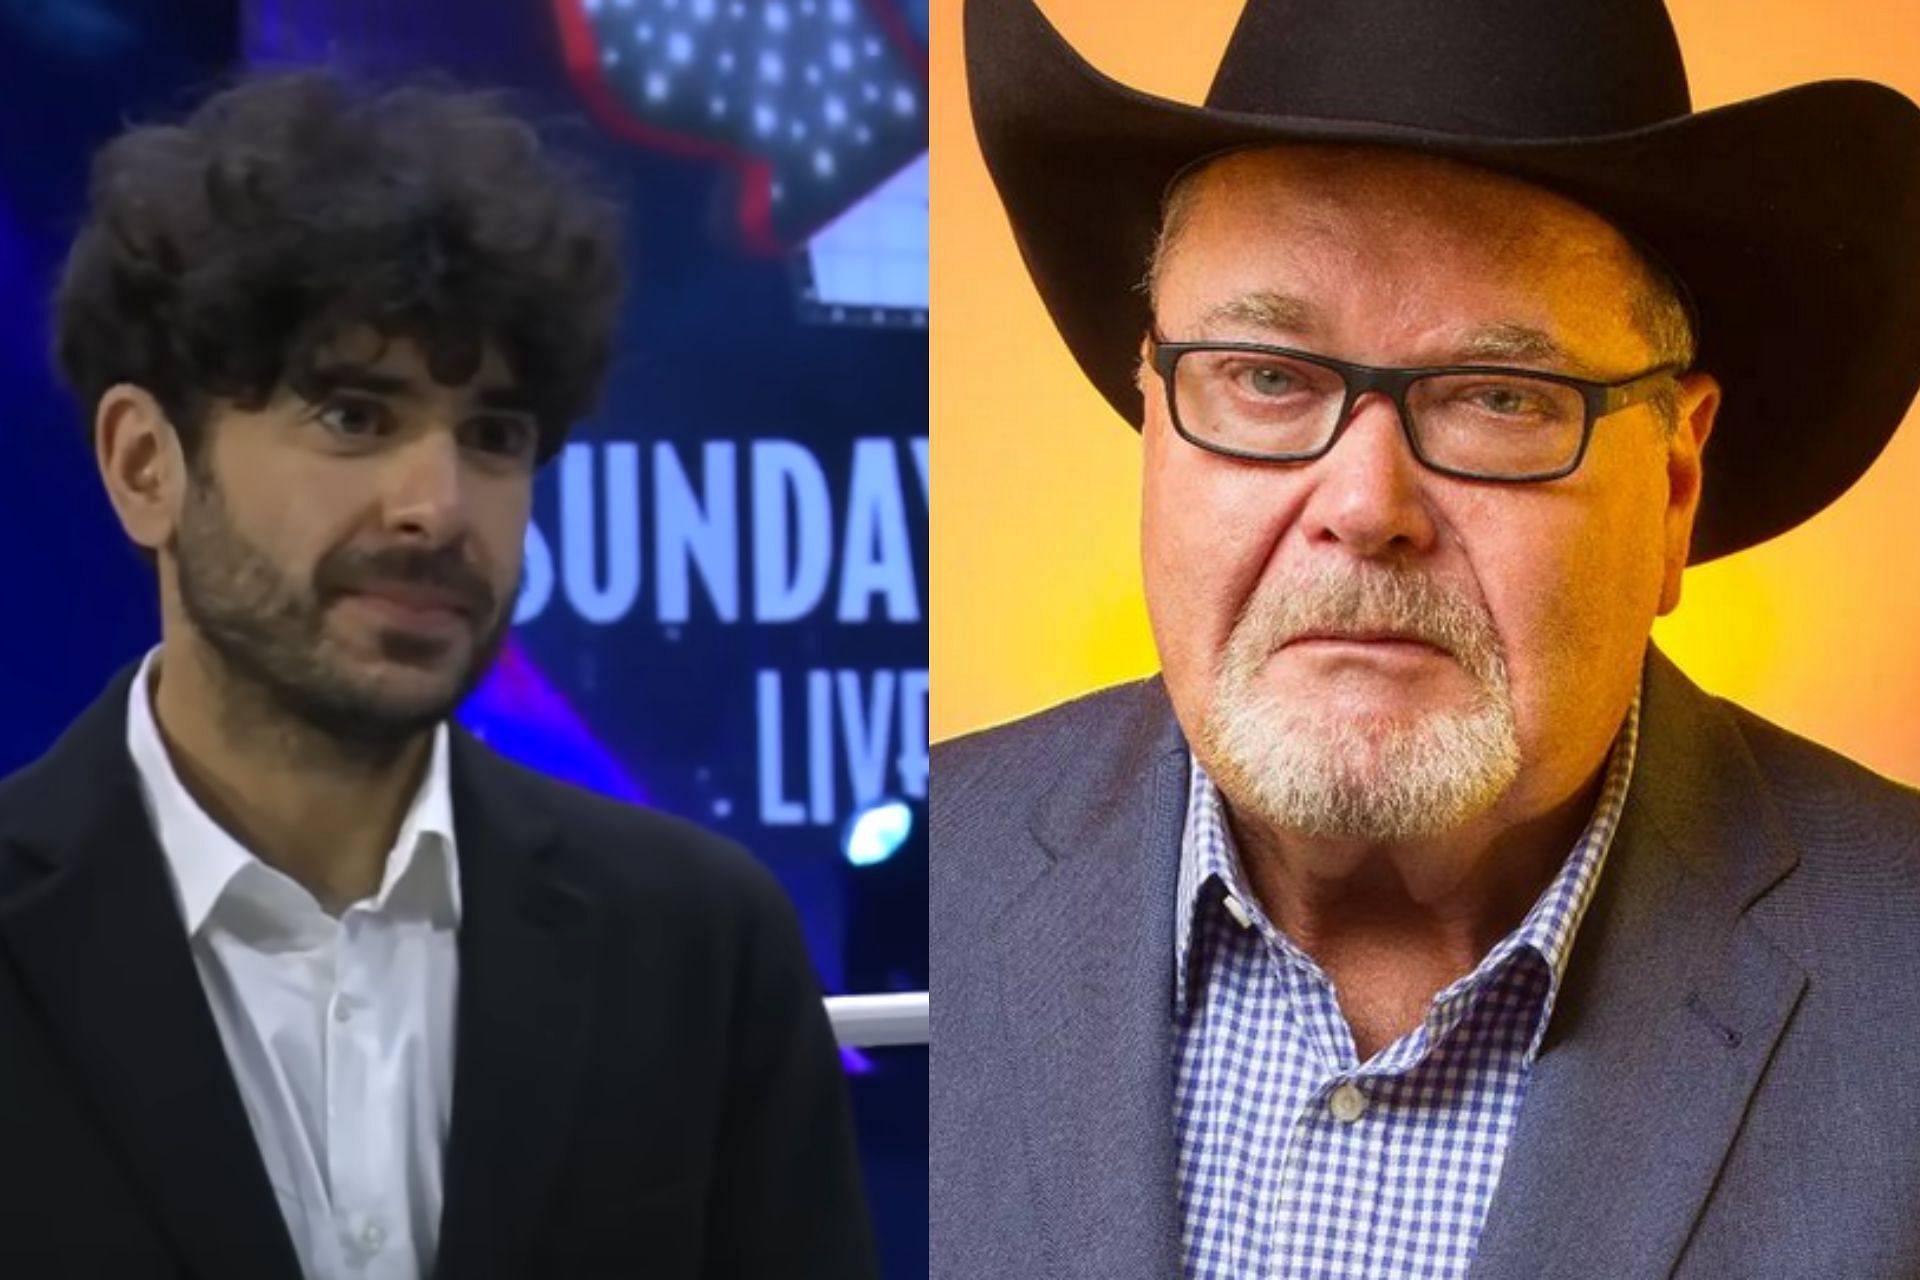 Jim Ross talks about the vicious attack on Tony Khan at Dynamite [Image Source: AEW Youtube and Jim Ross Instagram]